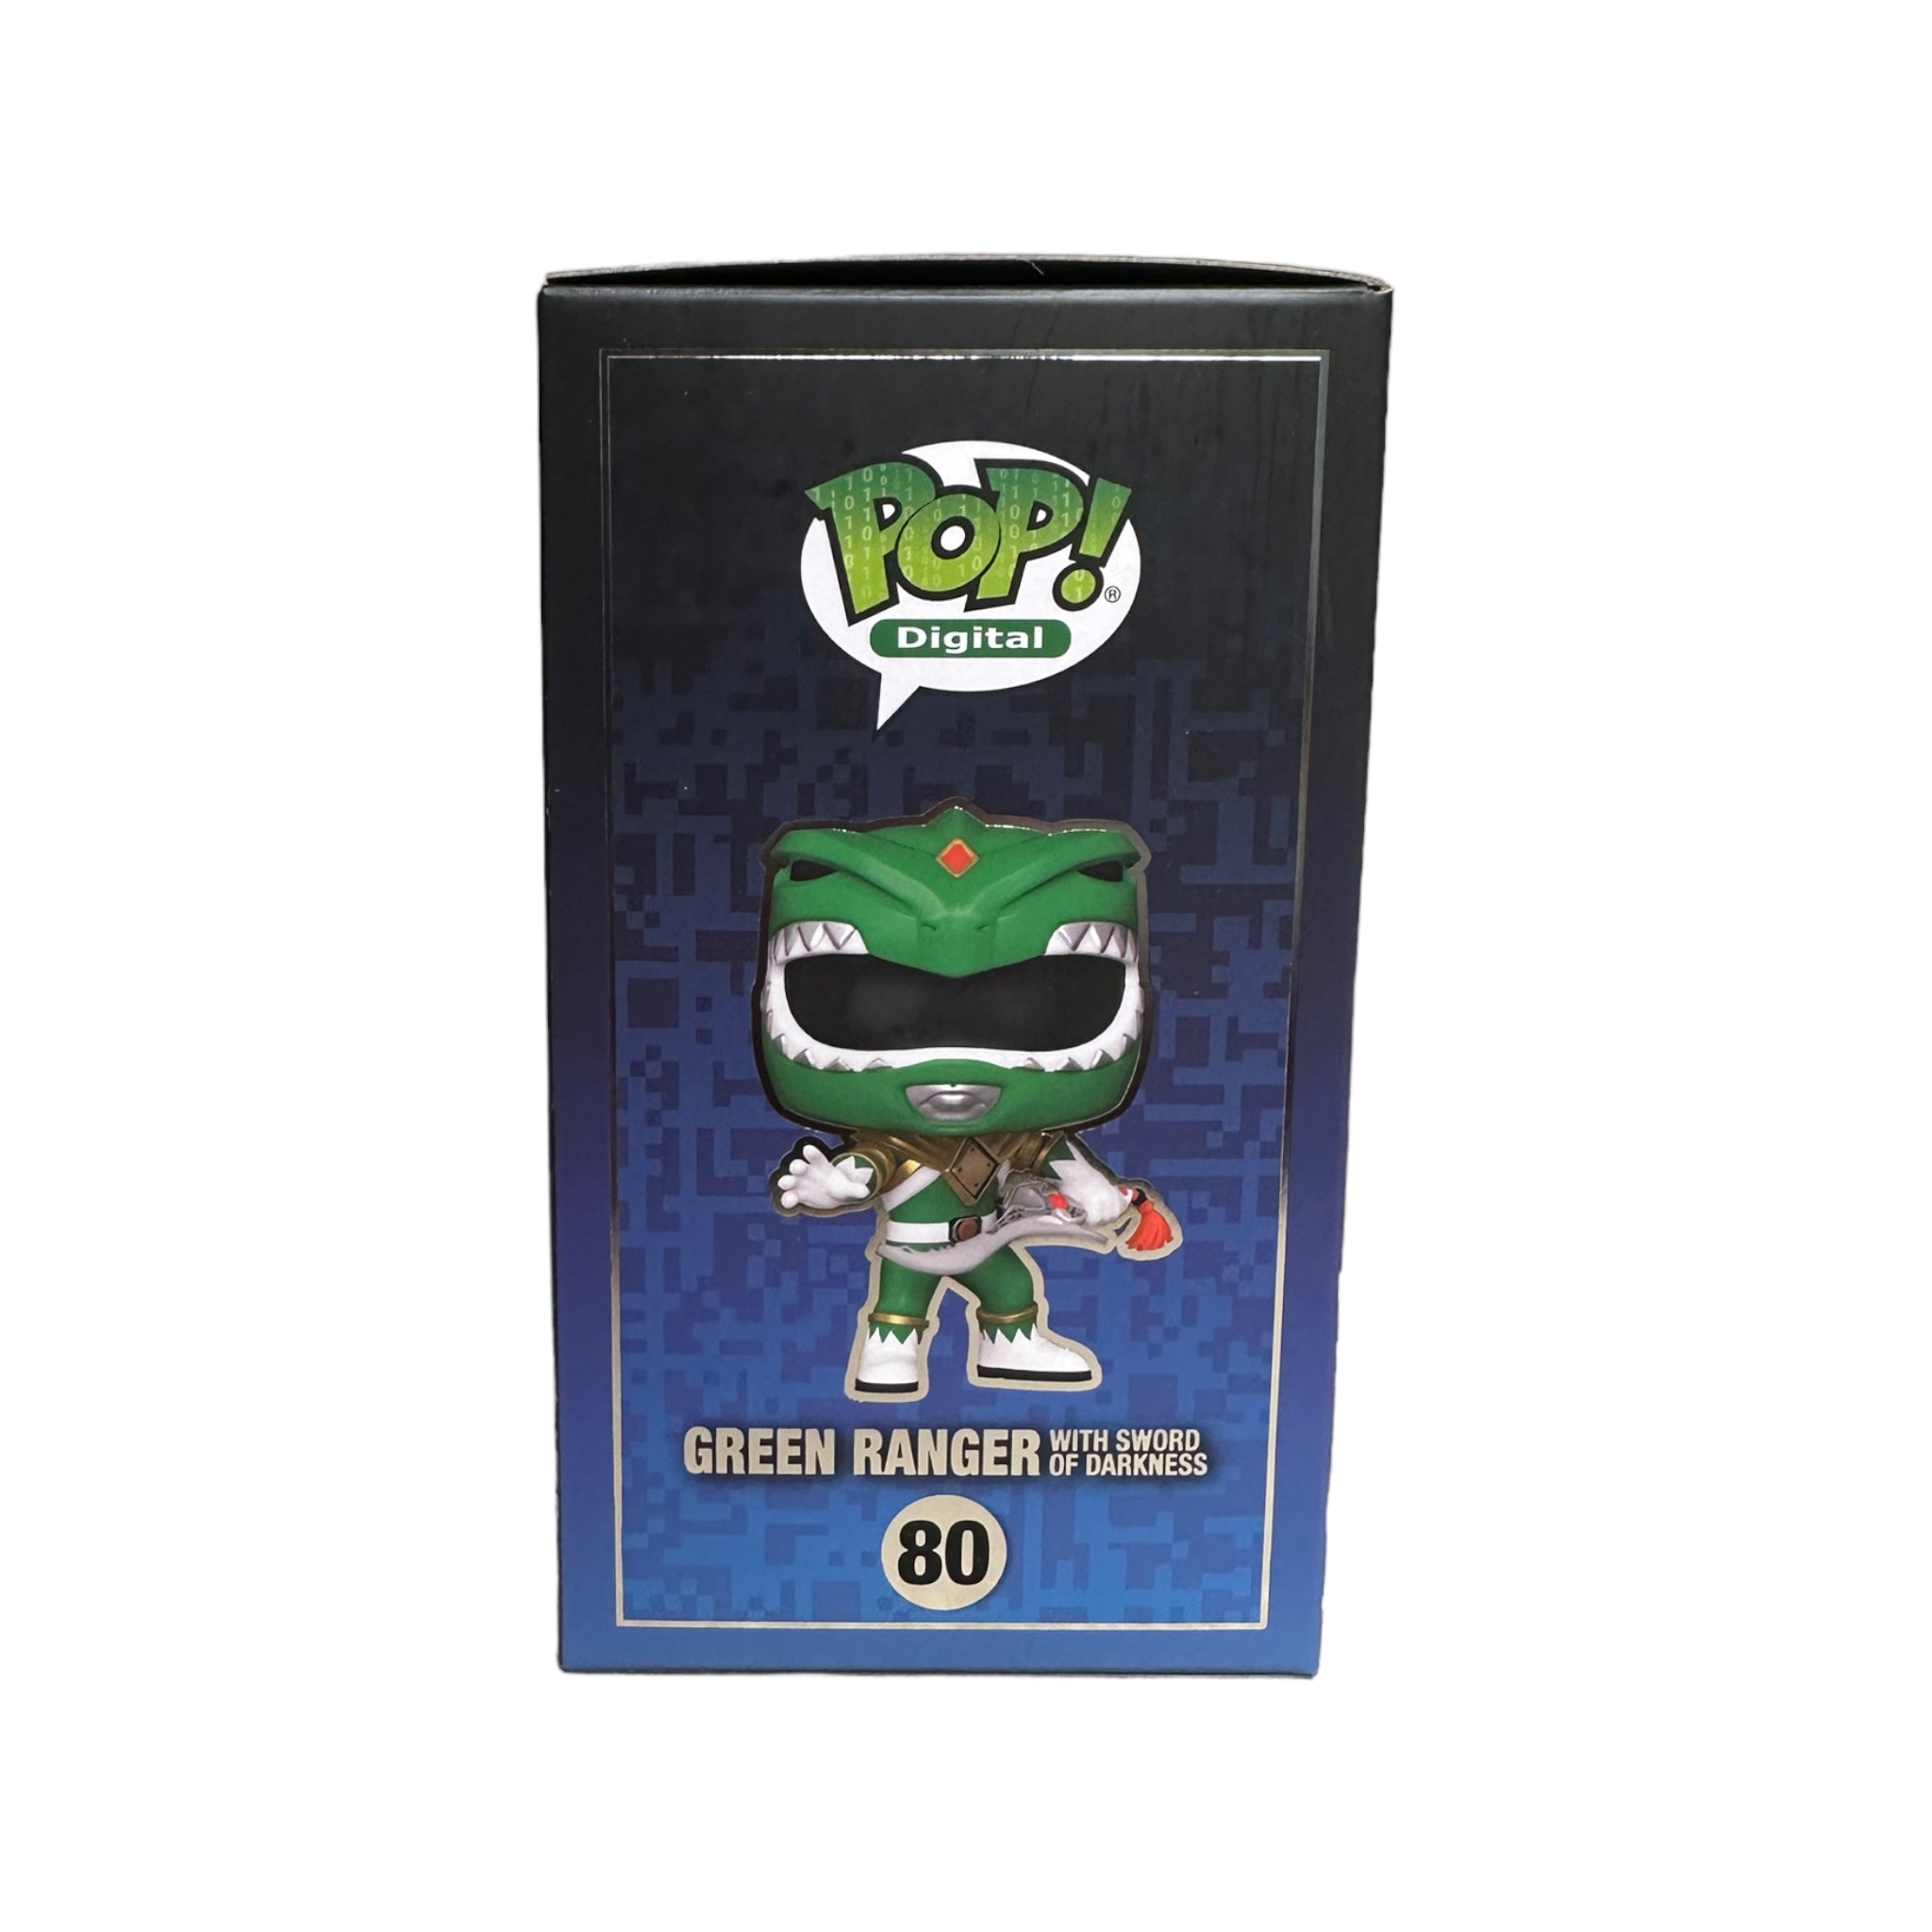 Green Ranger with Sword of Darkness #80 Funko Pop! - Mighty Morphin Power Rangers - NFT Release Exclusive LE999 Pcs - Condition 8.75/10